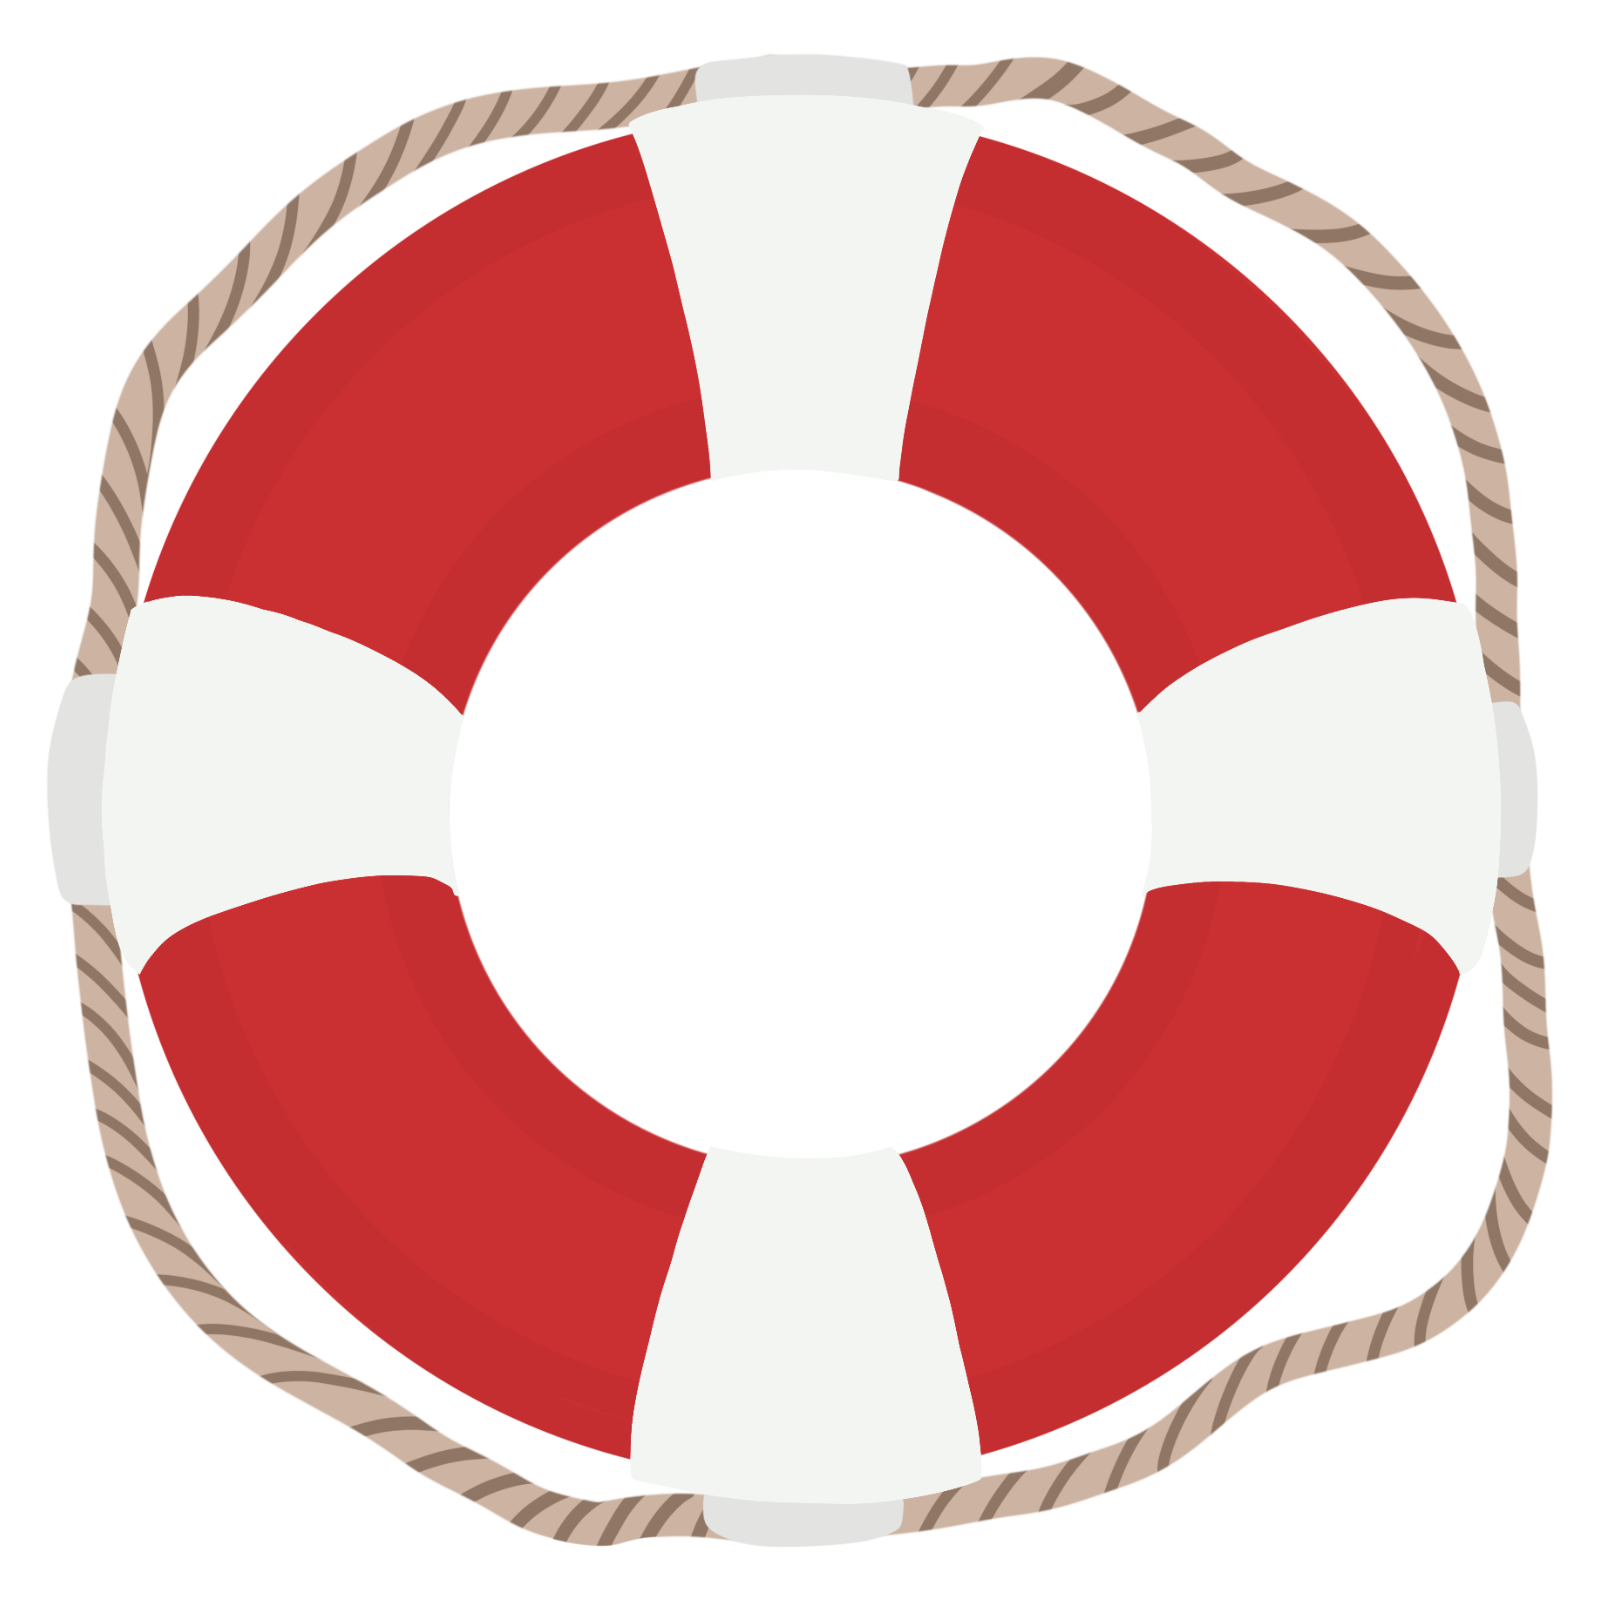 Red and white life preserver with rope detailing around